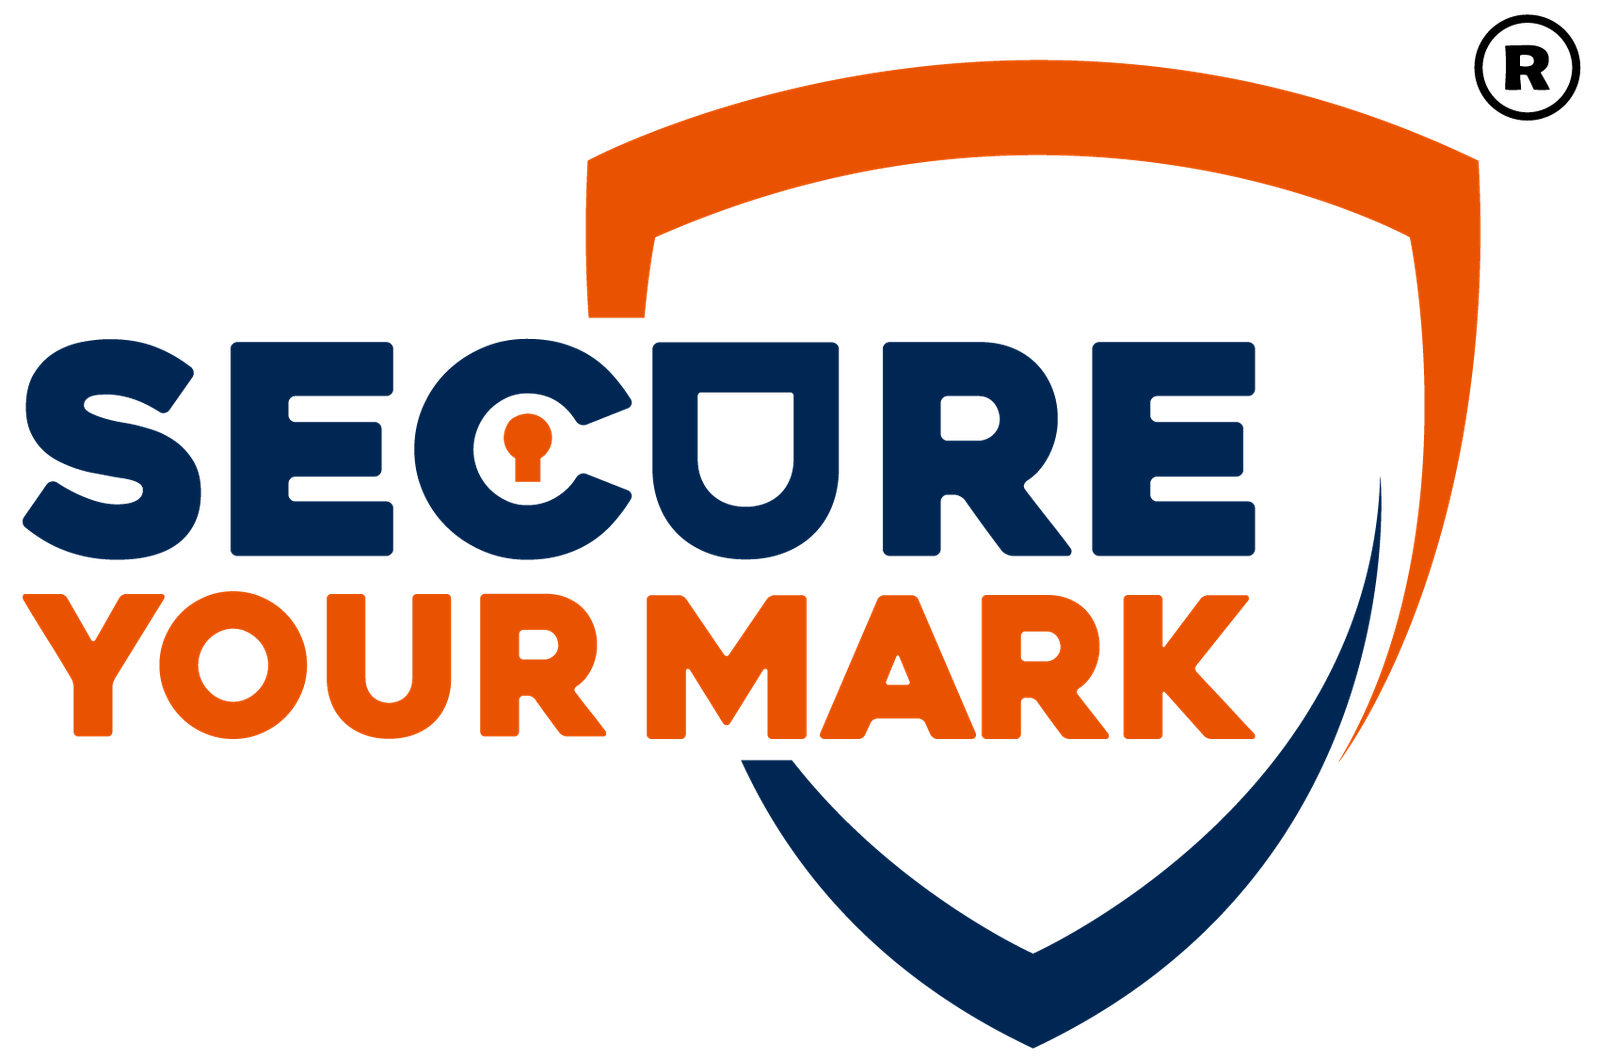 Secure Your Mark